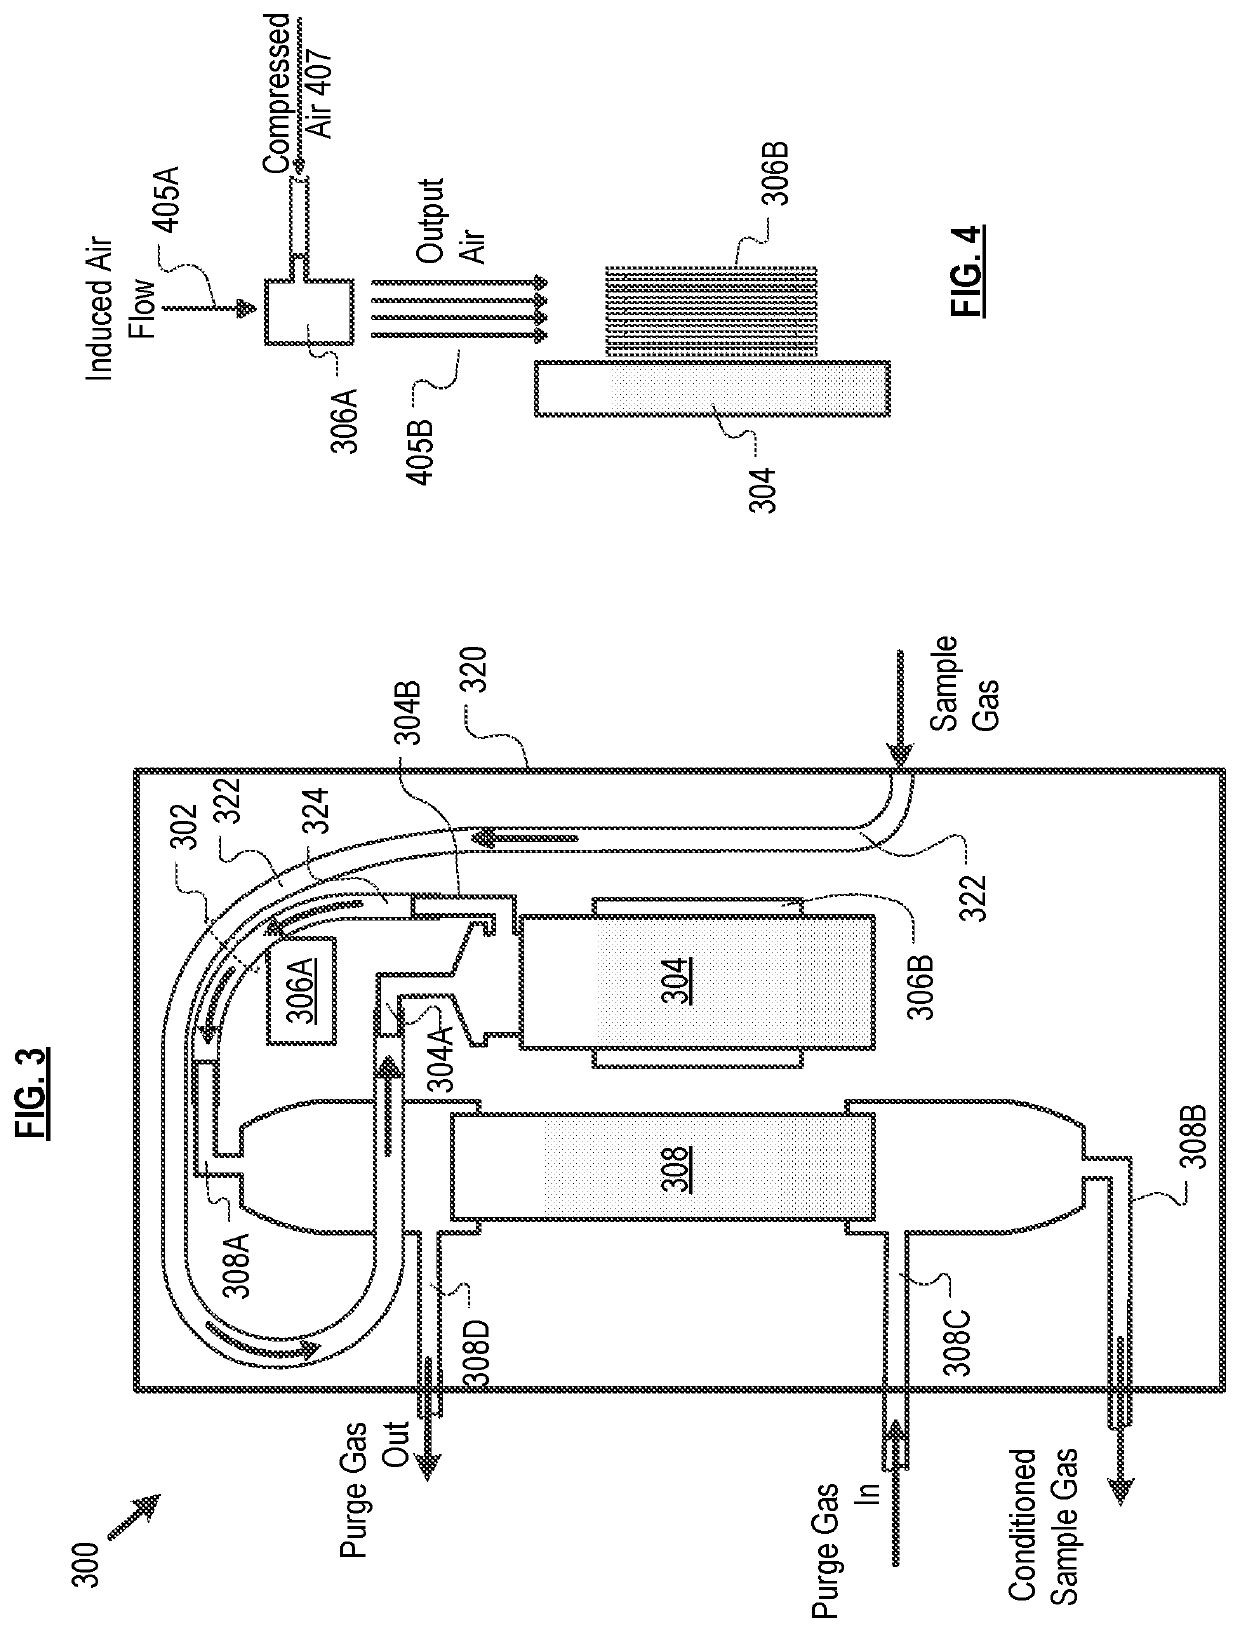 Hybrid cooler/dryer and method therefor